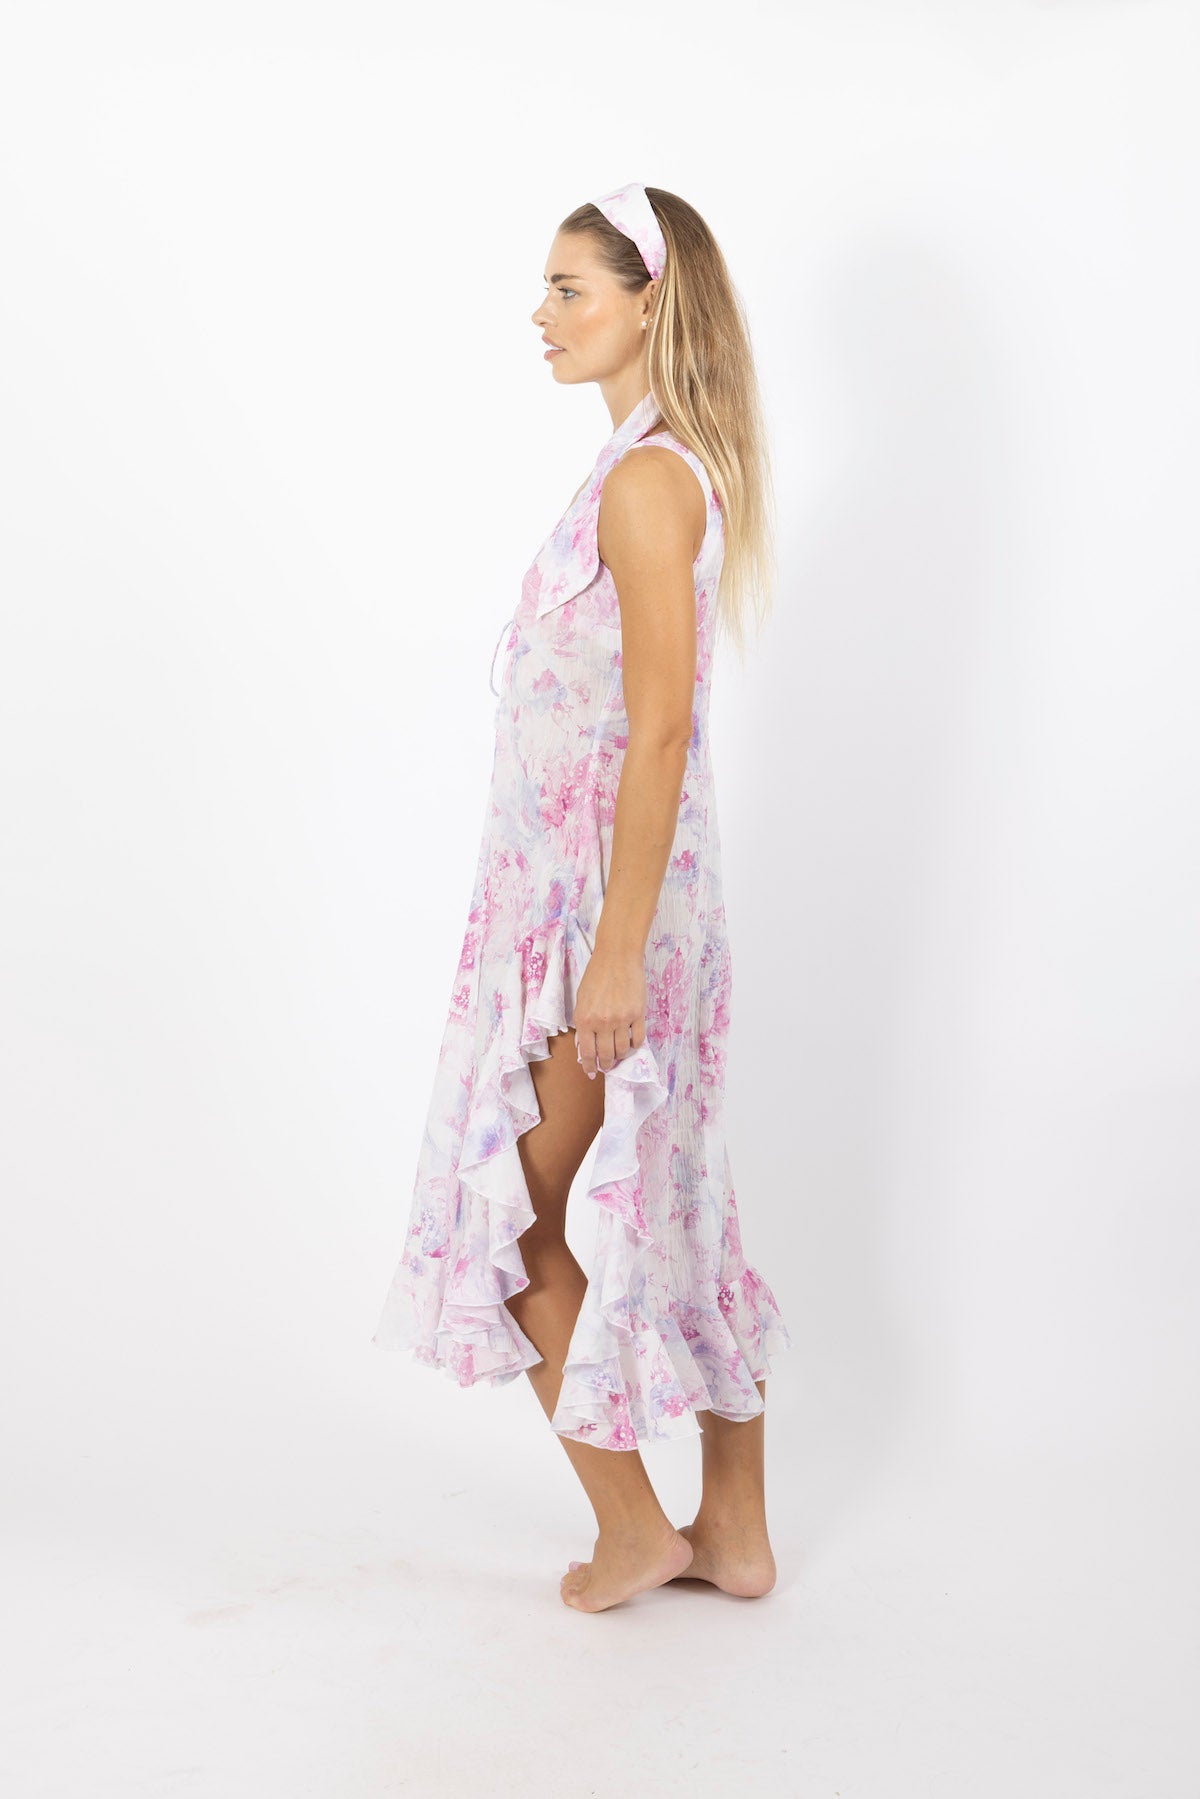 mustique beach cover up dress by cari capri - side view